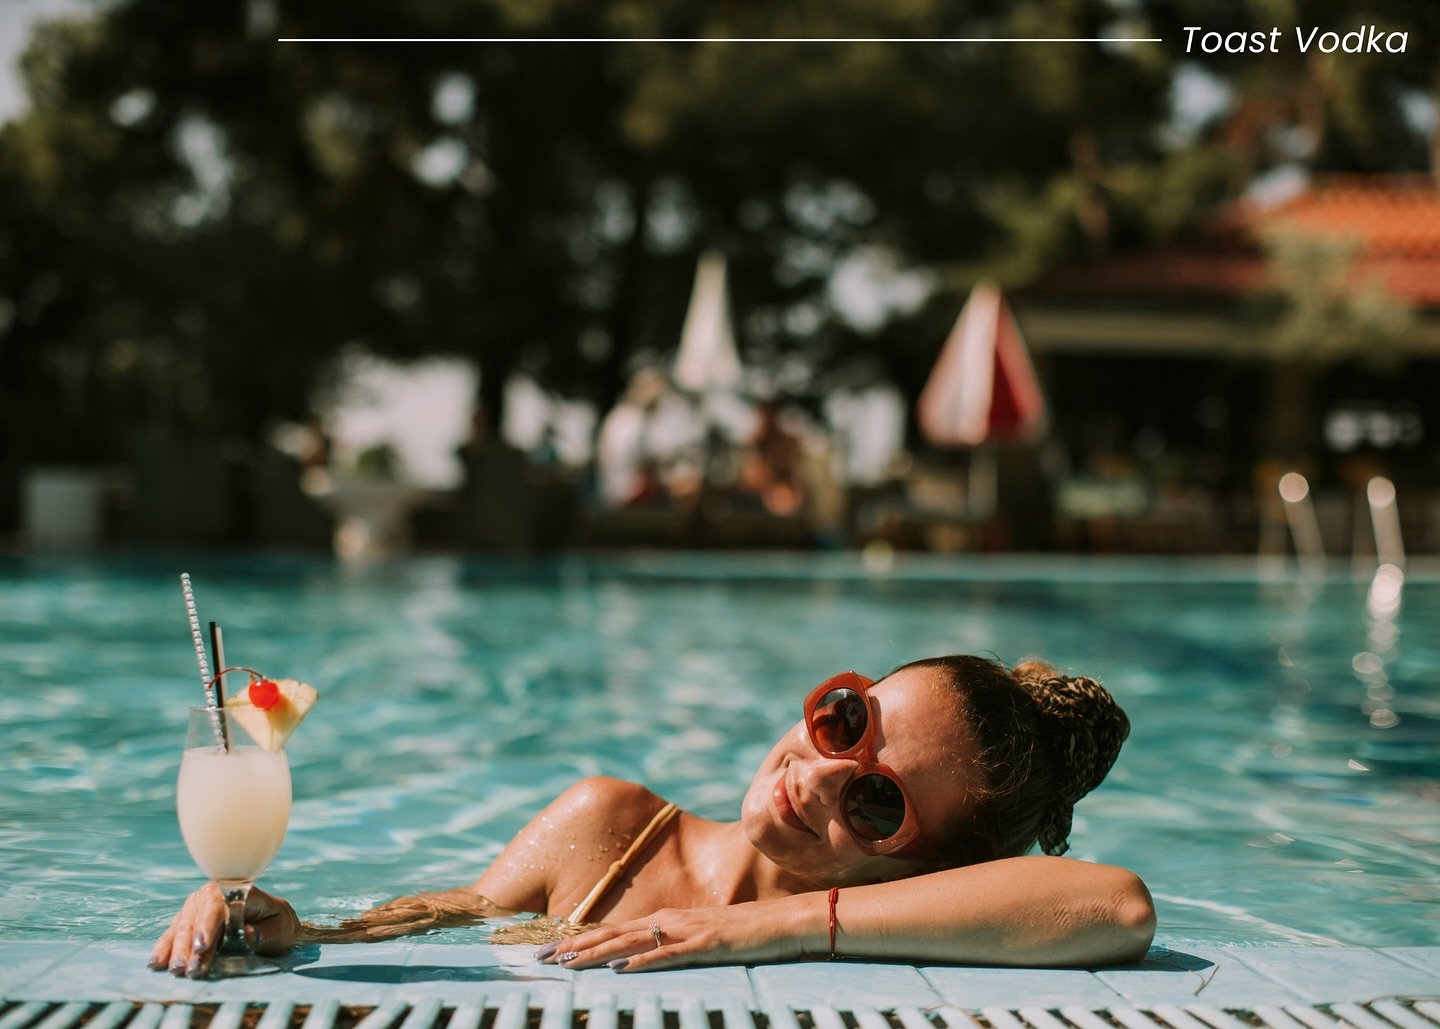 Saturday vibes by the pool, with a smile on my face and a refreshing mix of Toast Vodka in hand. Cheers to relaxation, sunshine, and unforgettable moments! 🍸

#PoolsideToast #explorepage #toastvodka